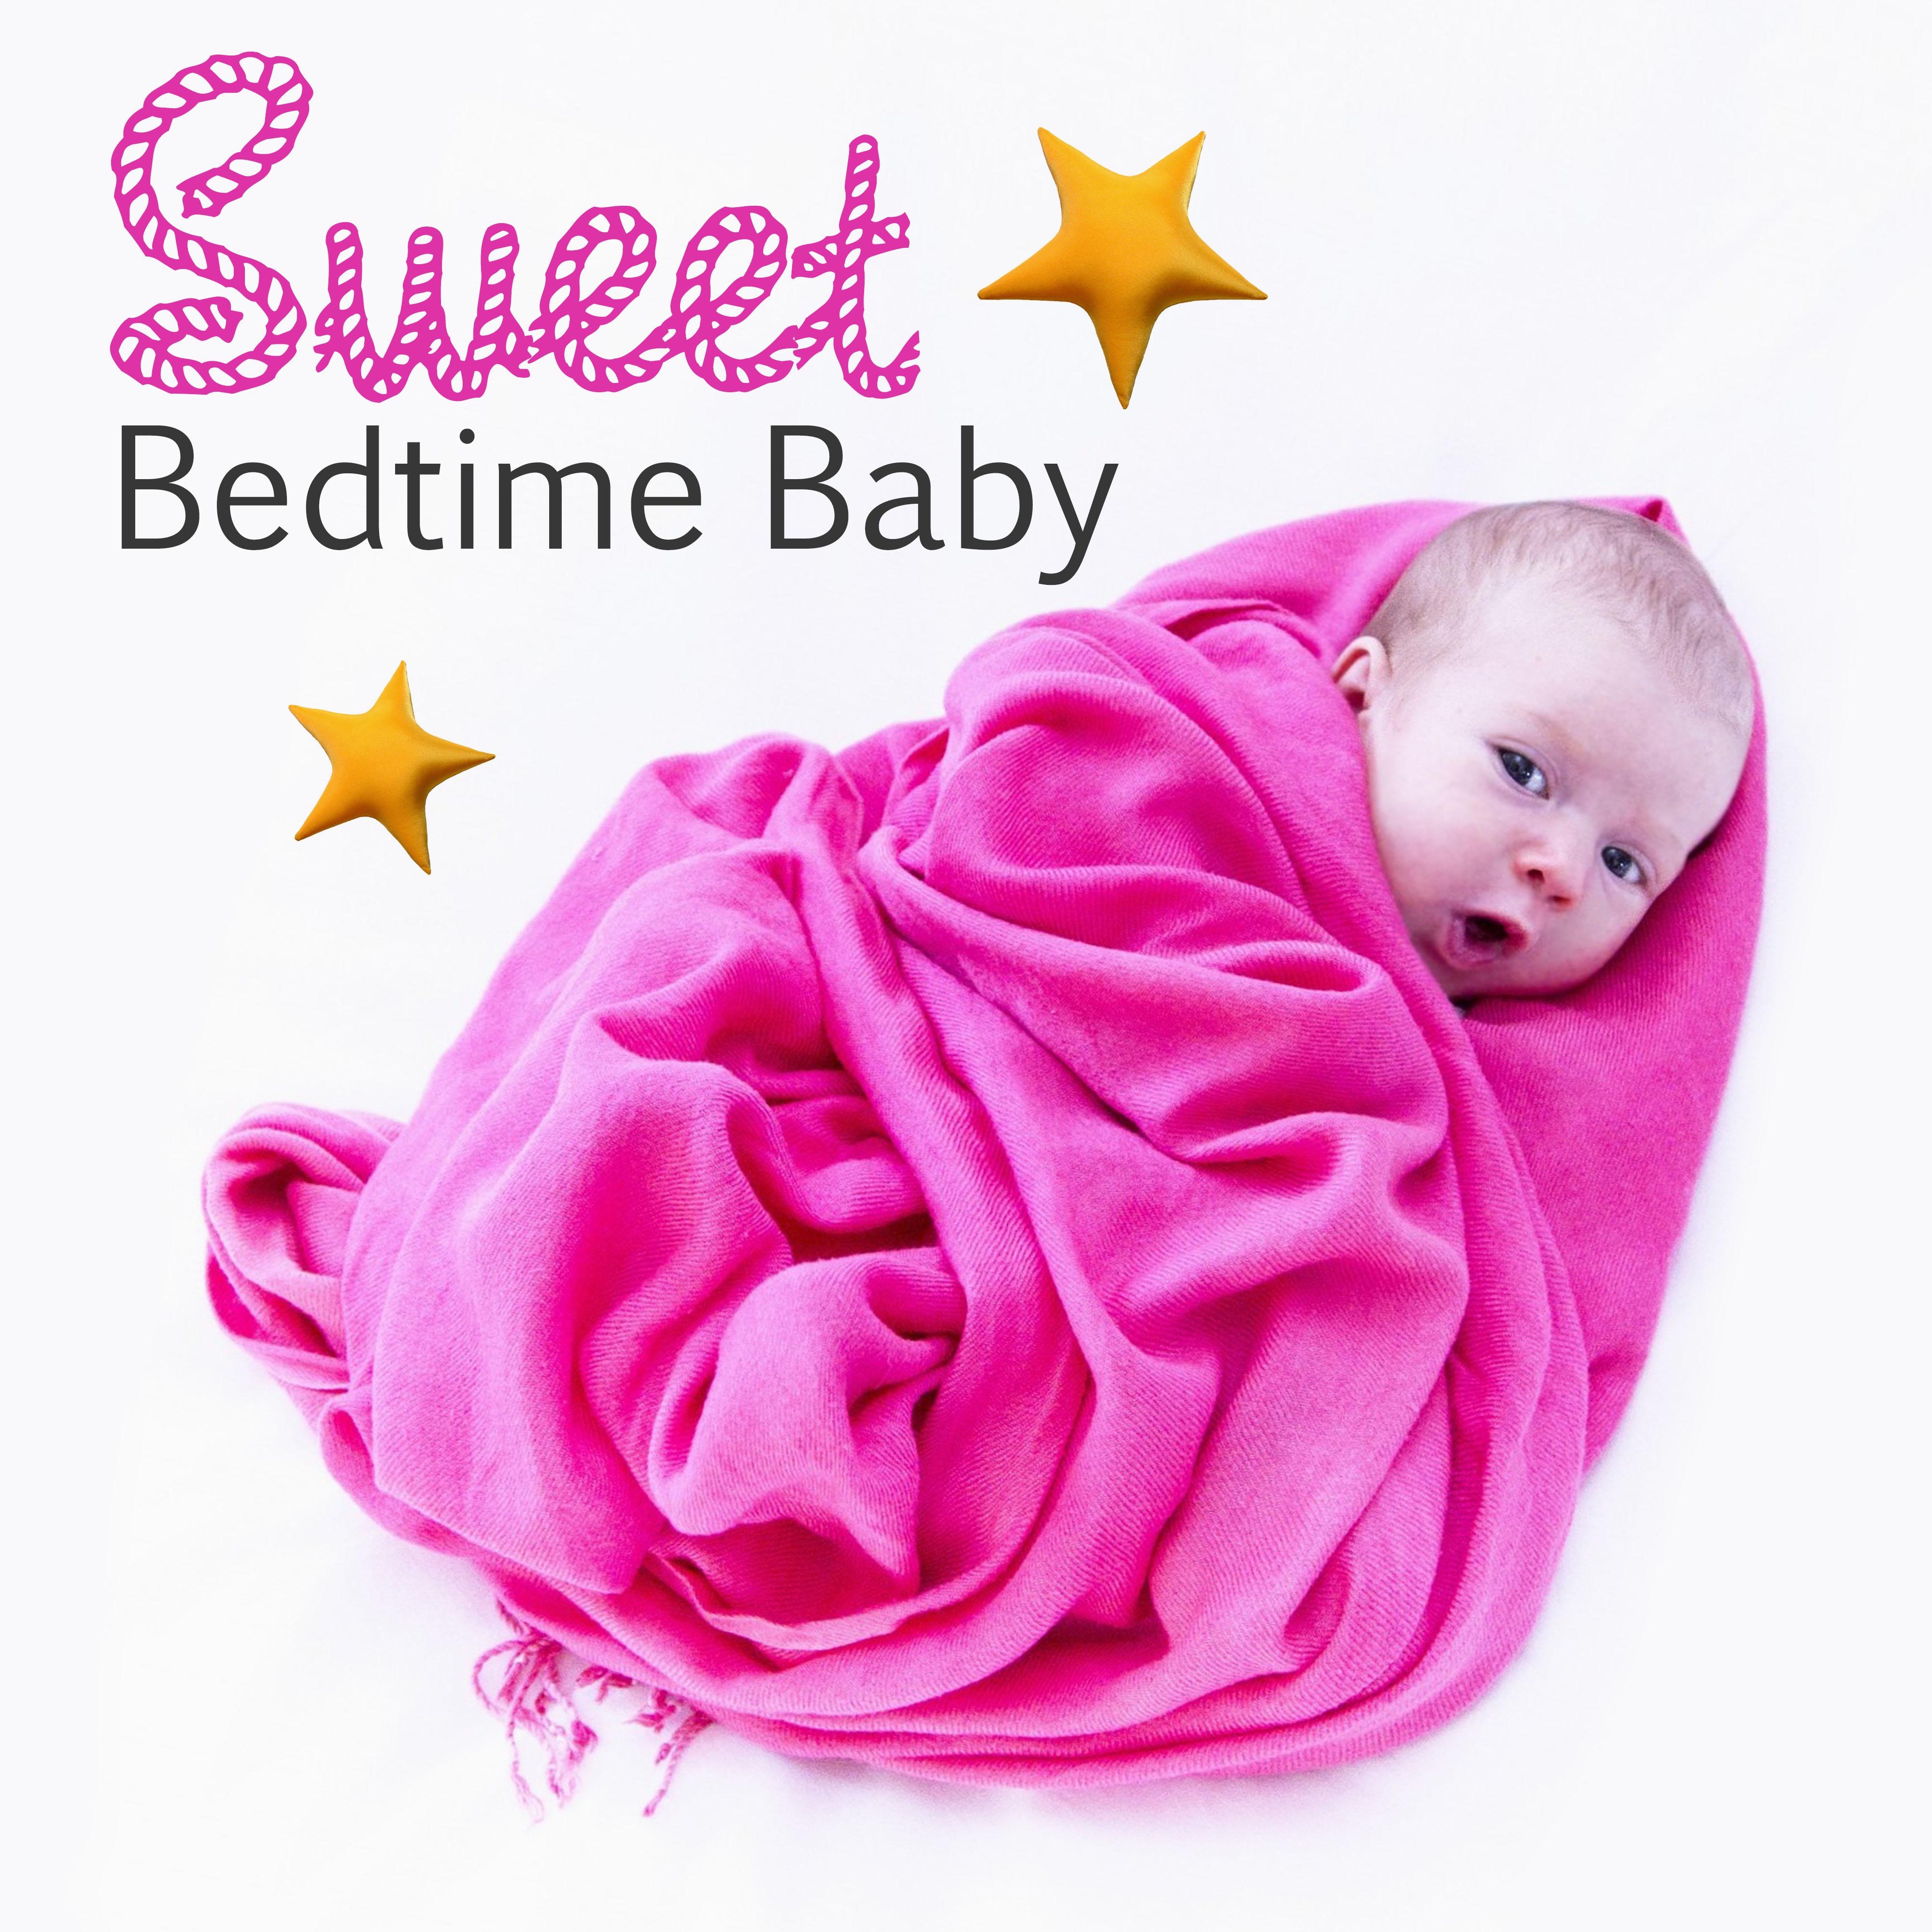 Sweet Bedtime Baby  Baby Music to Sleep, Mozart and Beethoven for Little Babies